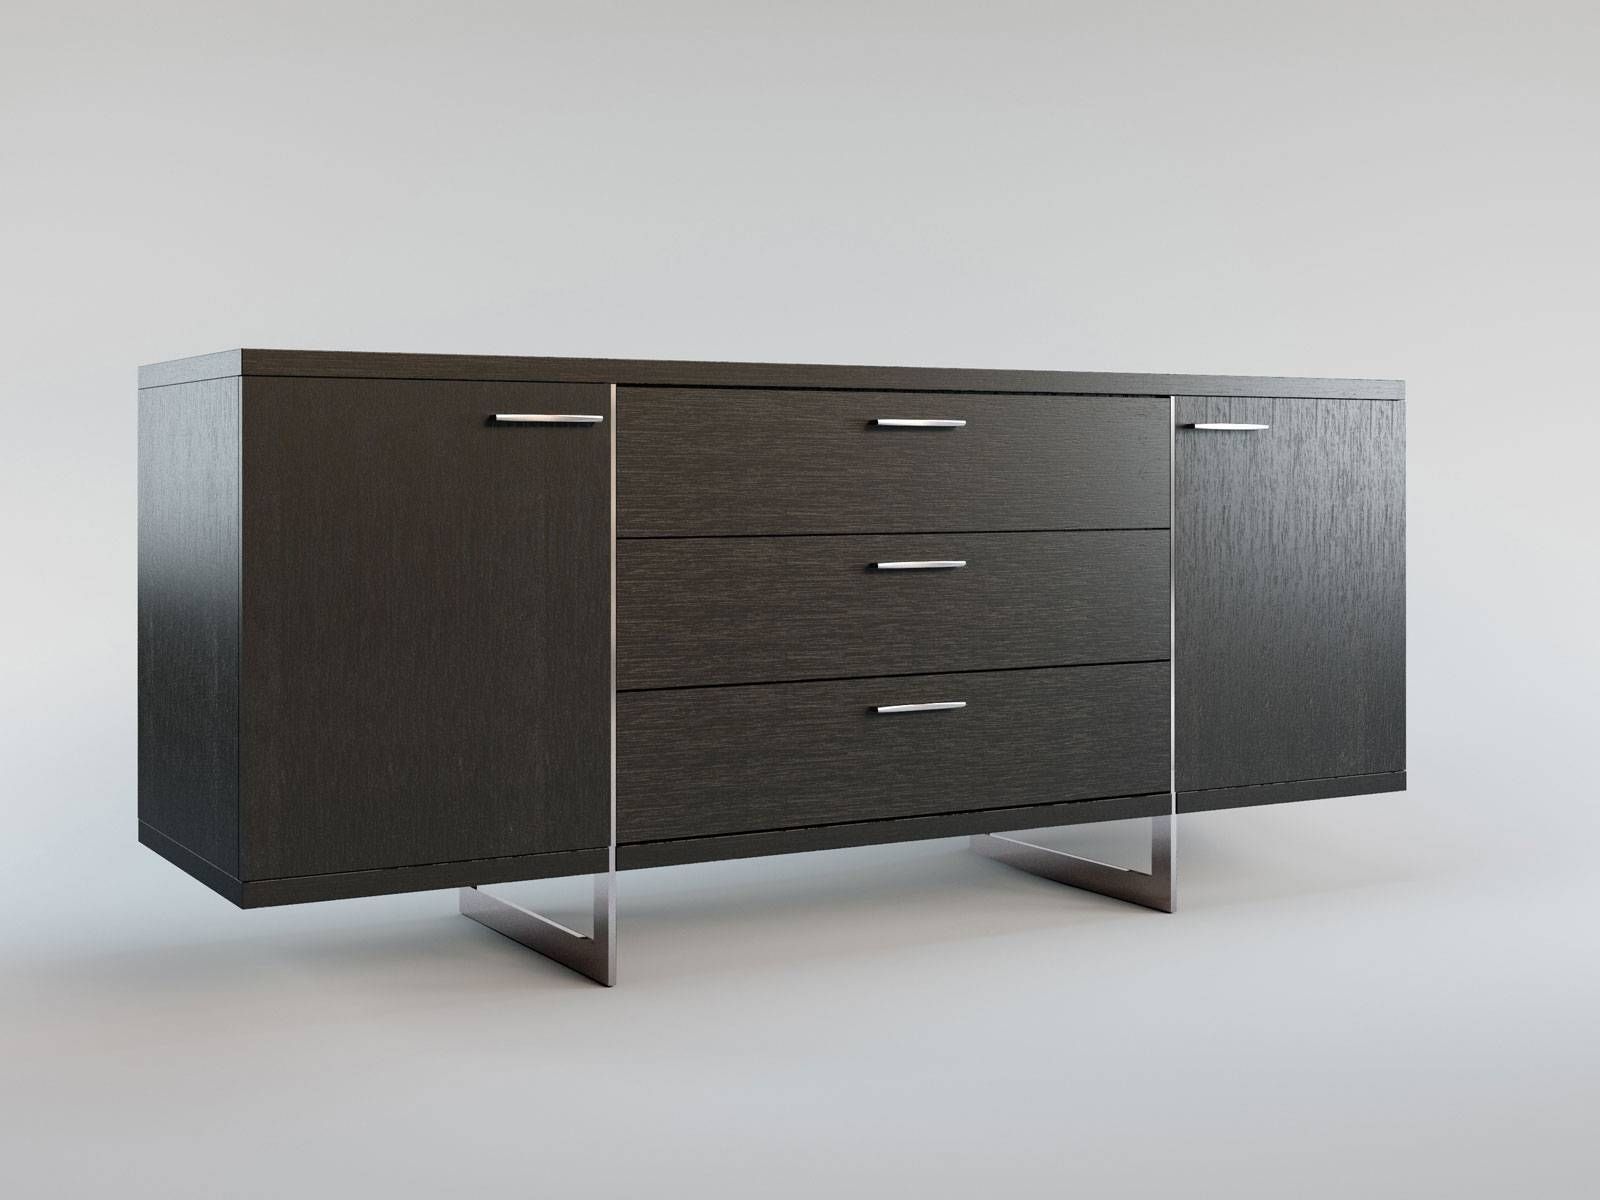 Contemporary Sideboard Buffet With Three Storage Drawers Tulsa Regarding Sideboard Modern Contemporary (View 19 of 20)